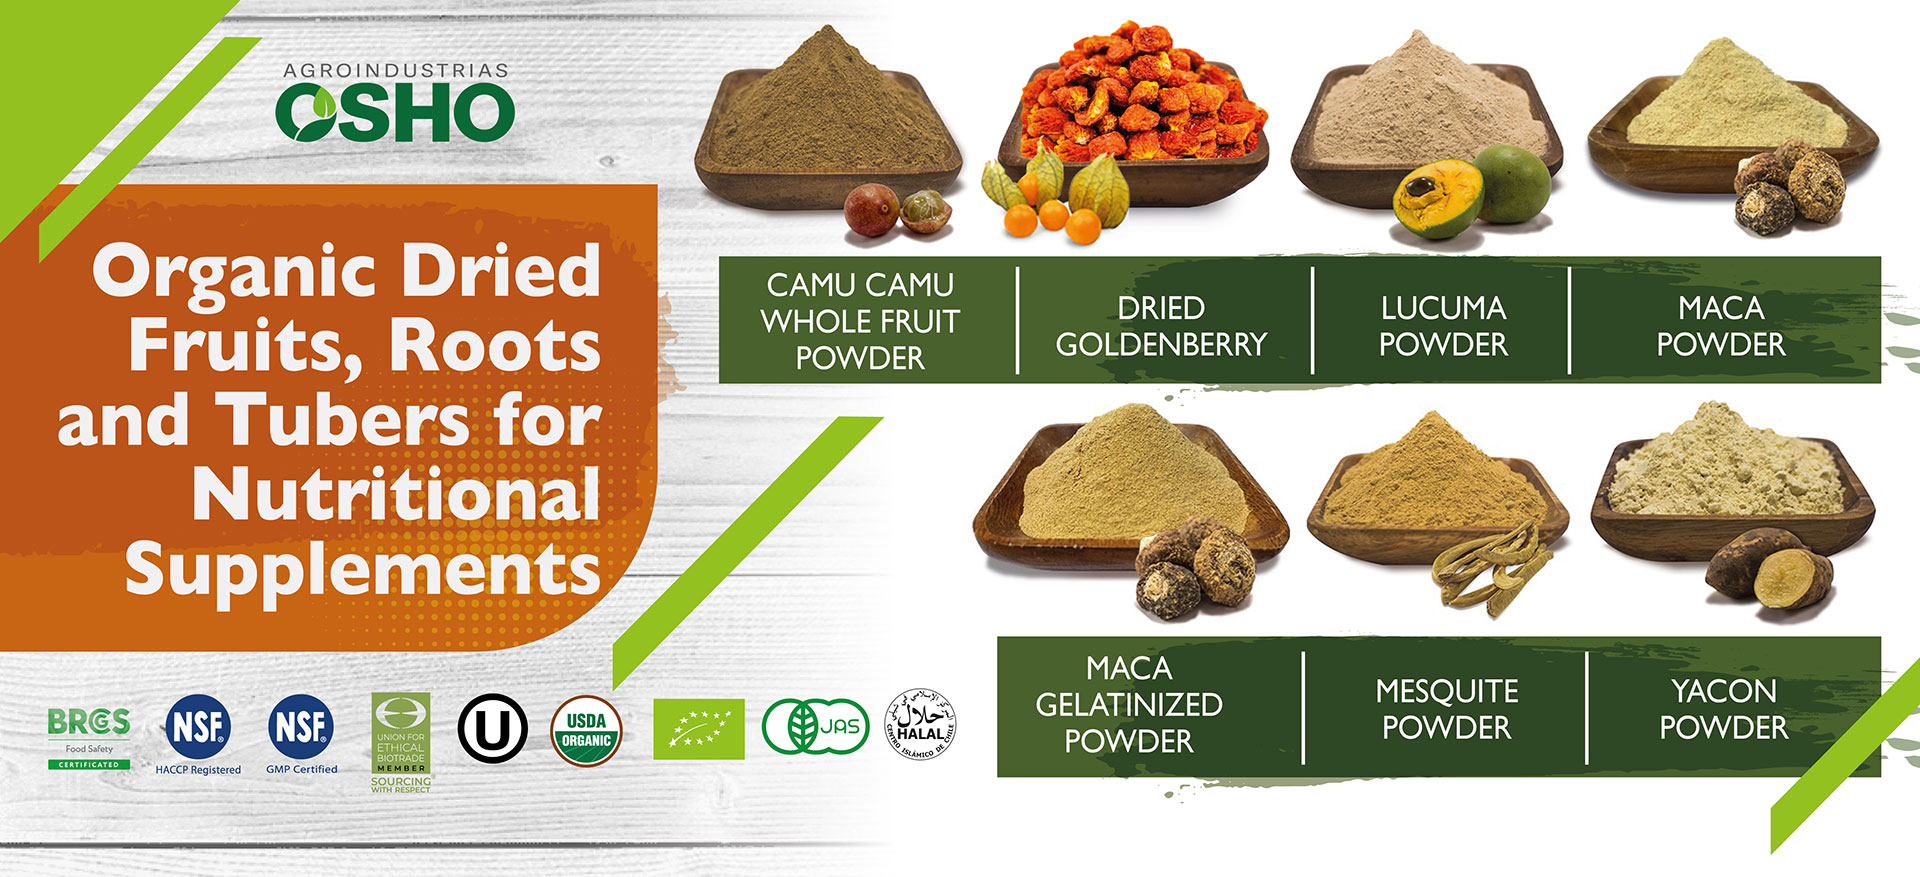 innovations-organic-dried-fruits